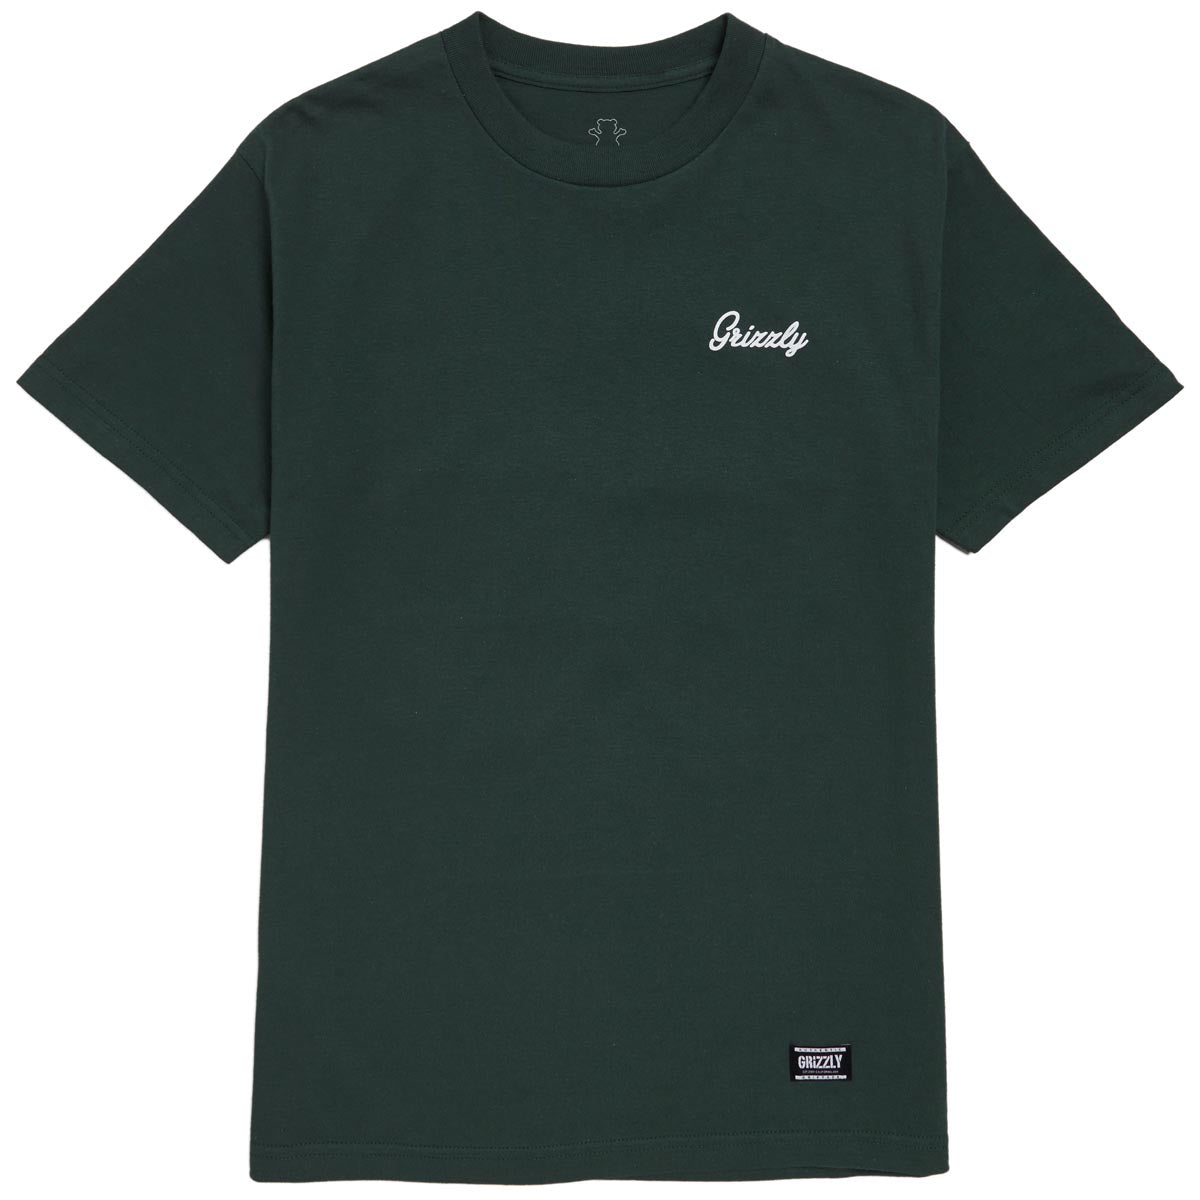 Grizzly Rolling Deep T-Shirt - Forest Green image 2